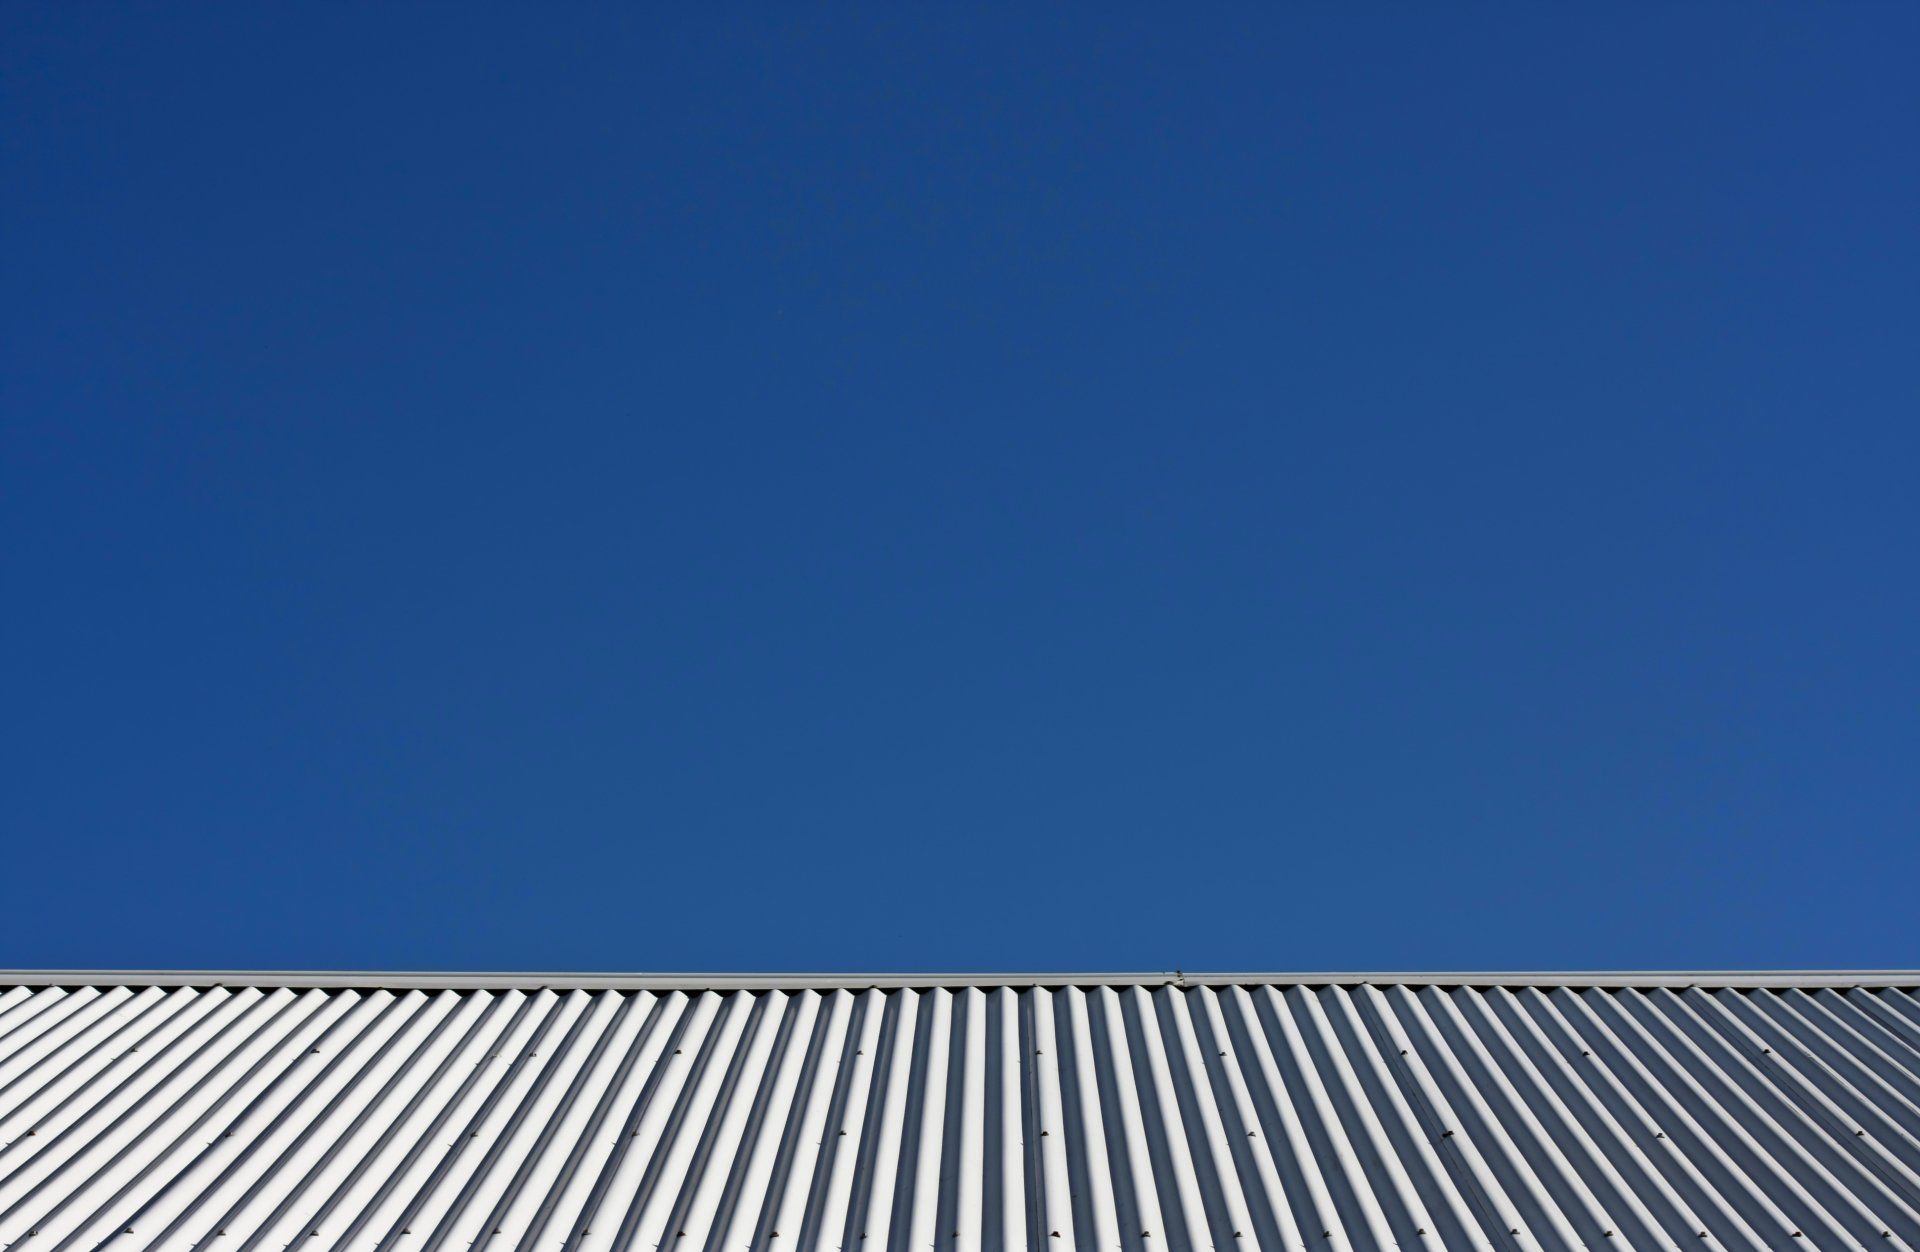 Image depicts a corrugated iron roof, taken from the gutter up to the pitched top with a clear blue sky  in the background.